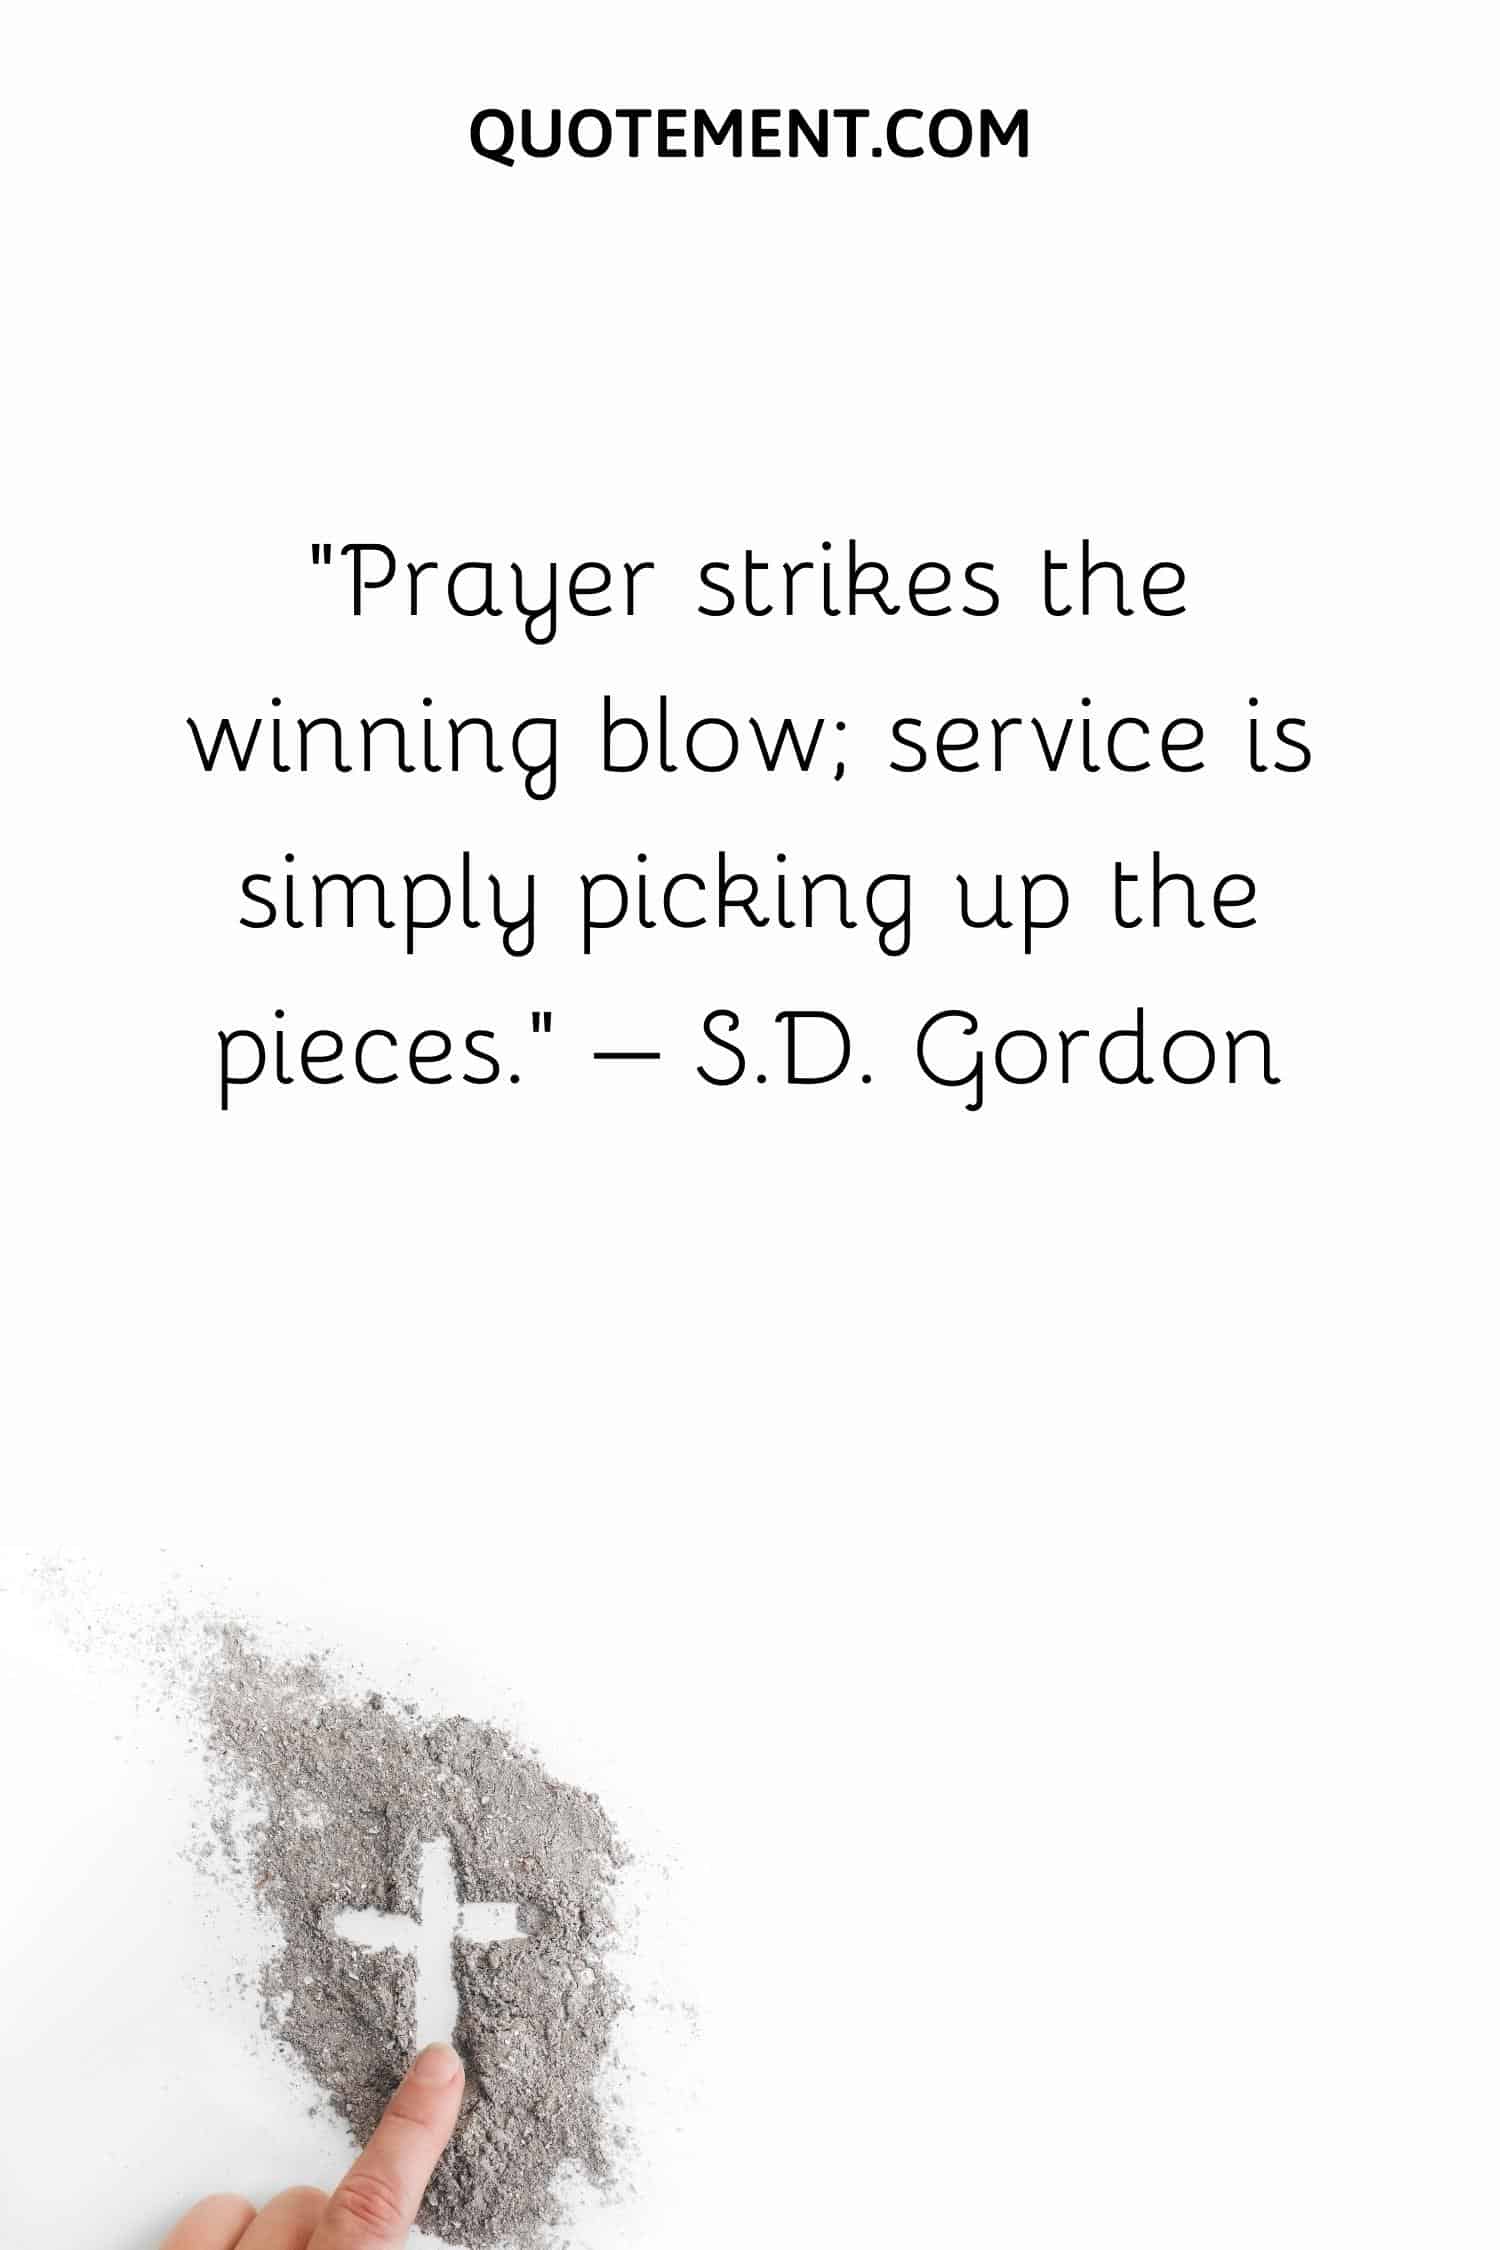 Prayer strikes the winning blow; service is simply picking up the pieces